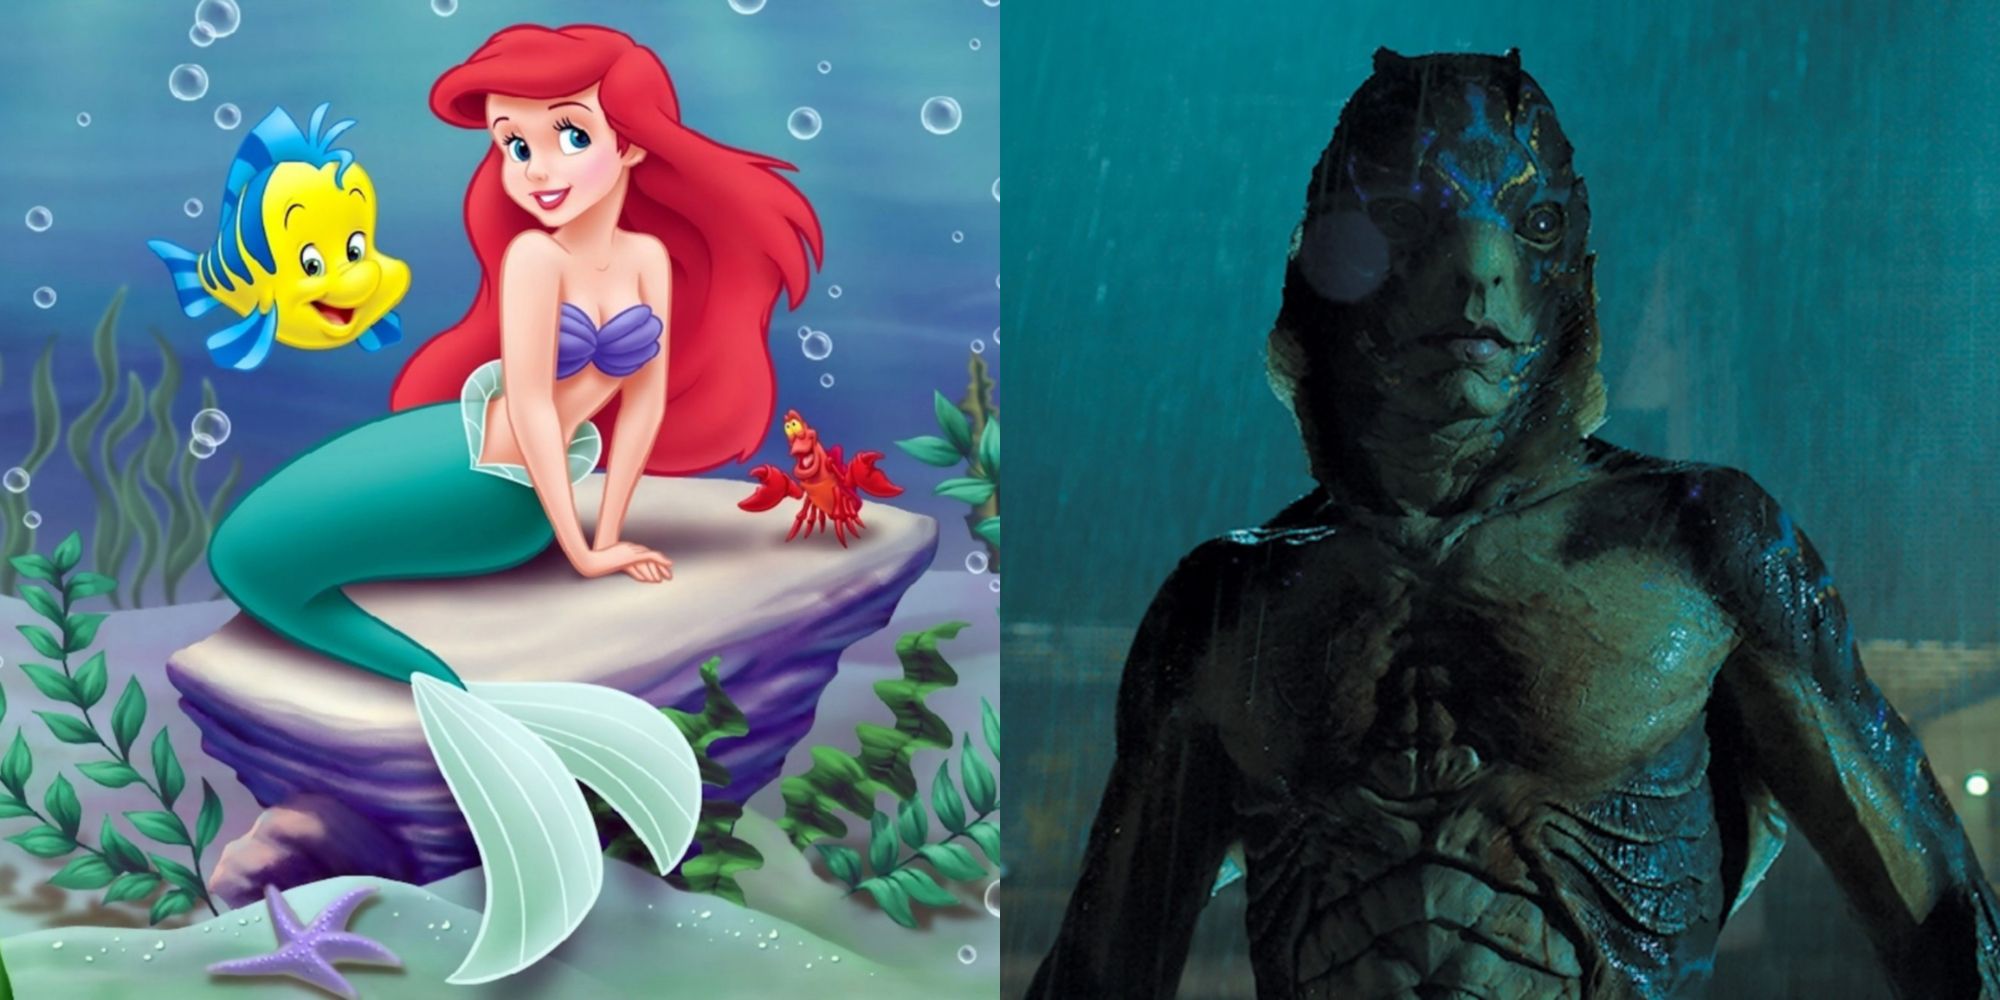 Split image showing Ariel in The Little Mermaid and the Amphibian Man in The Shape of Water.